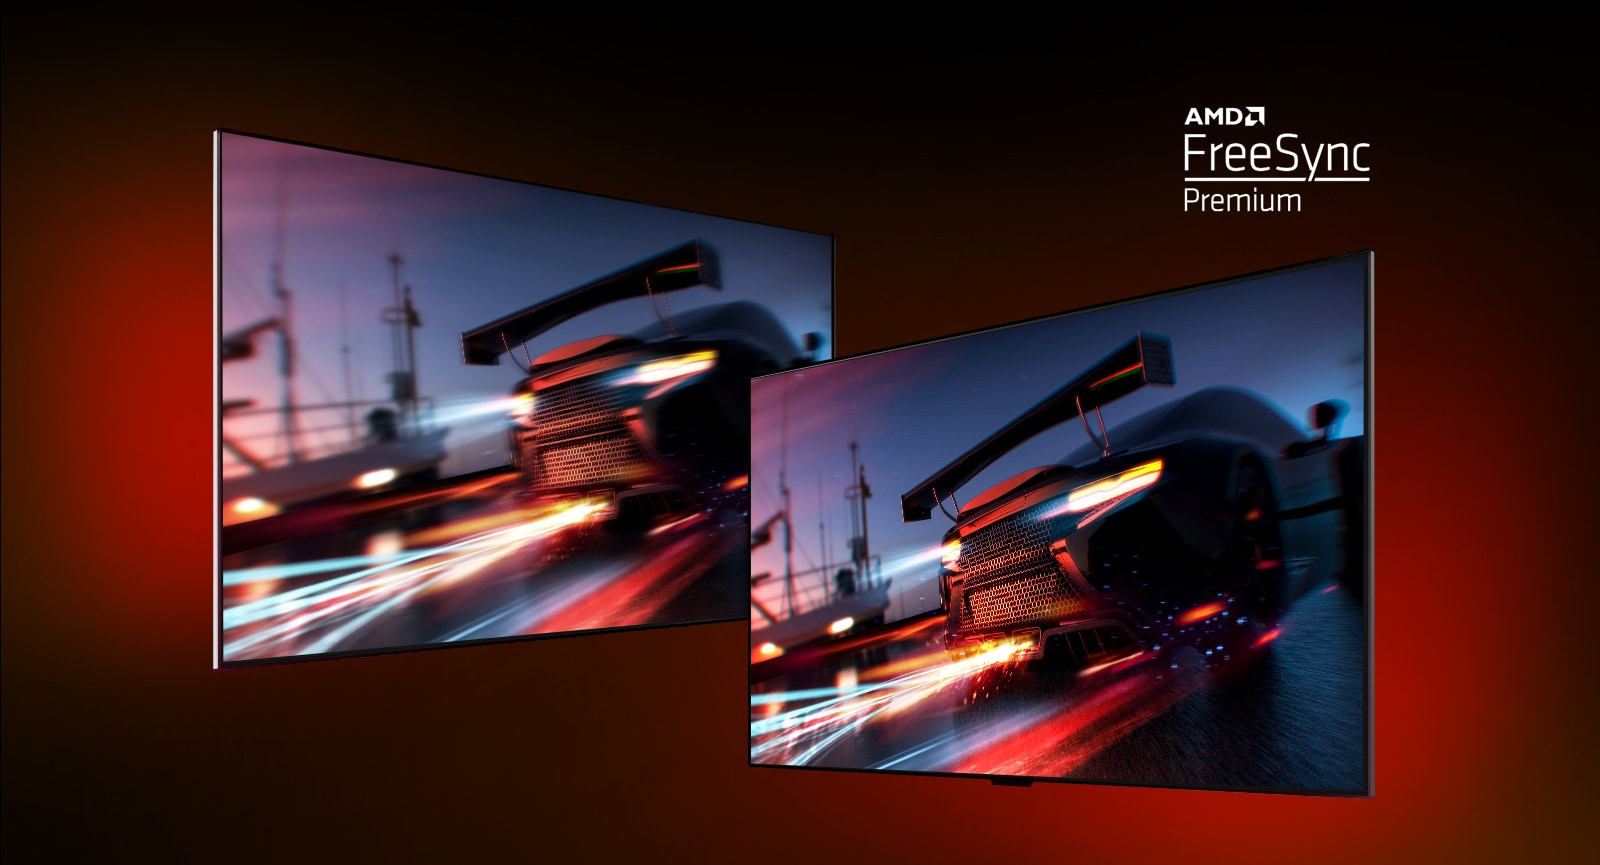 There are two TVs – on the left shows a FORTNITE game scene with a racing car. On the right also shows the same game scene but in a brighter and clearer picture display. On right top corner shows AMD FreeSync premium logo.  